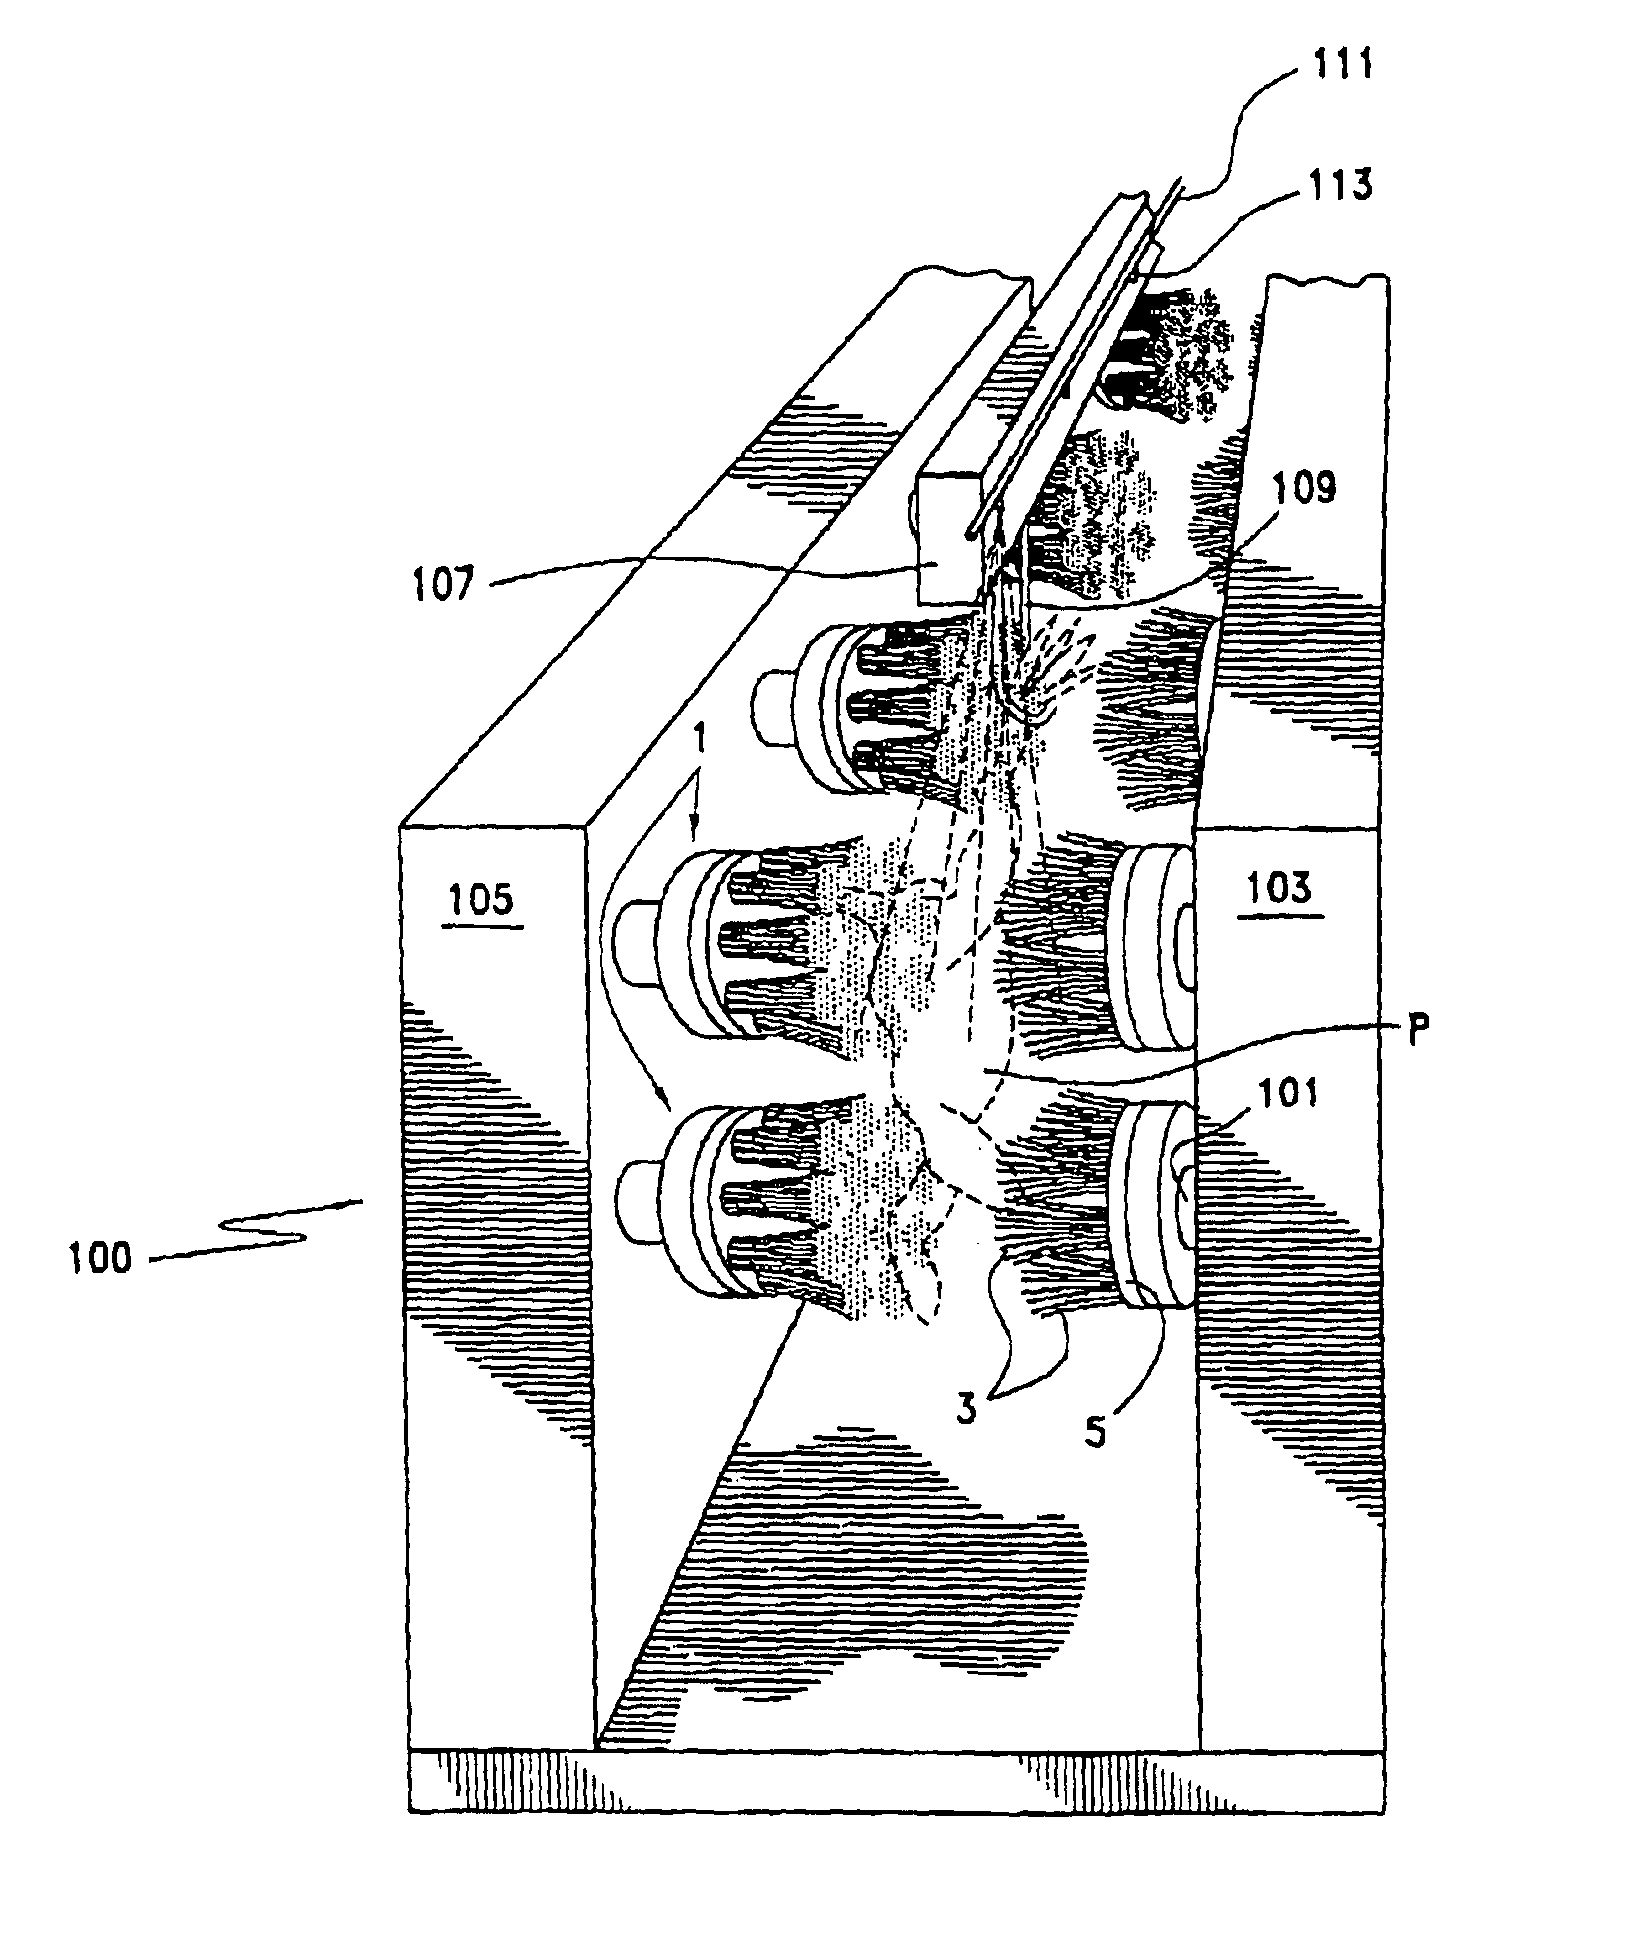 Poultry de-feathering apparatus and method